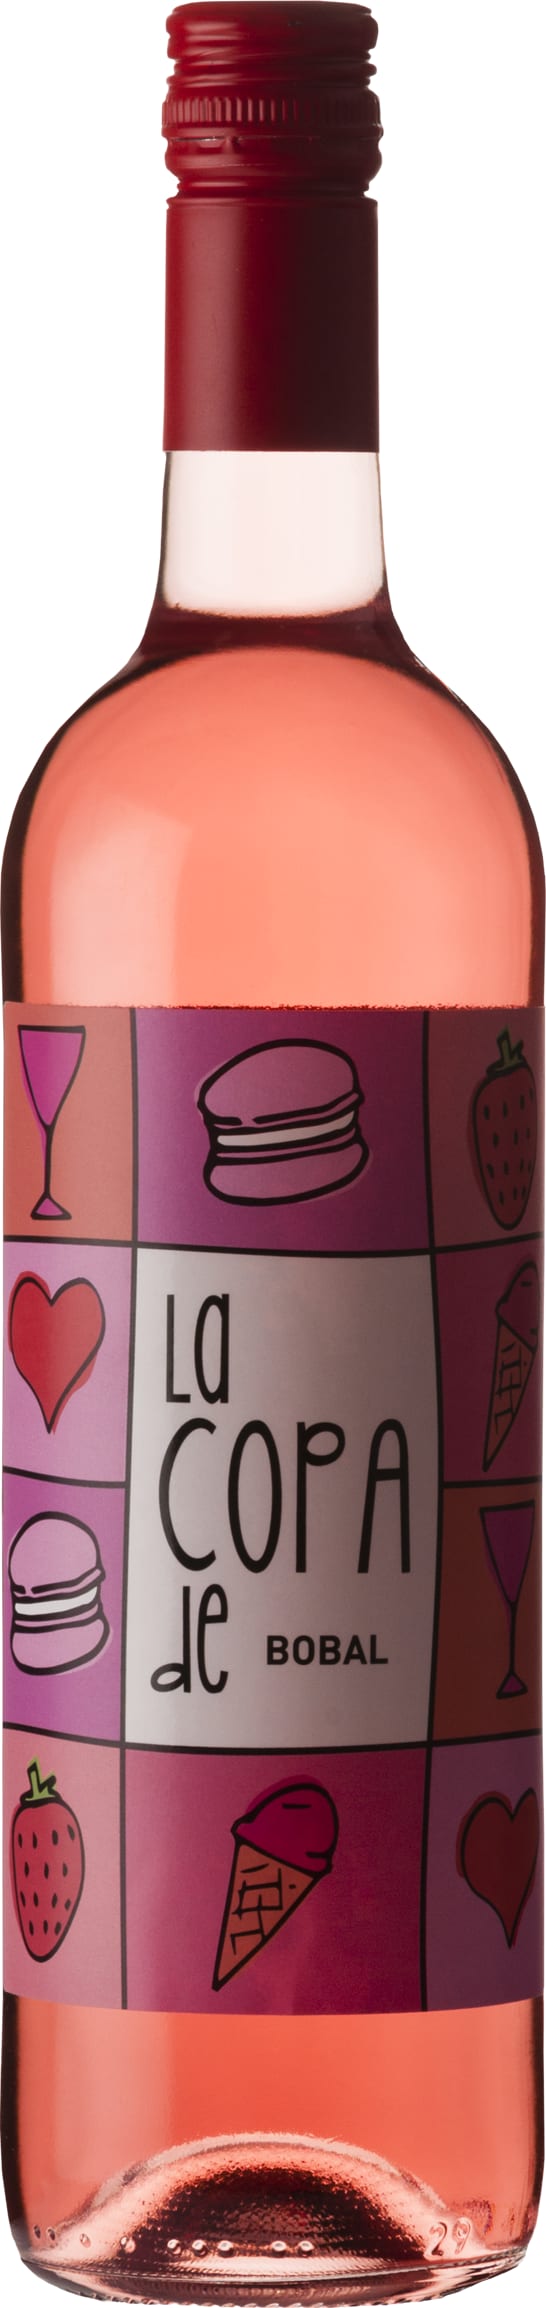 Bodegas Covinas La Copa de Bobal Rose 2022 75cl - Buy Bodegas Covinas Wines from GREAT WINES DIRECT wine shop